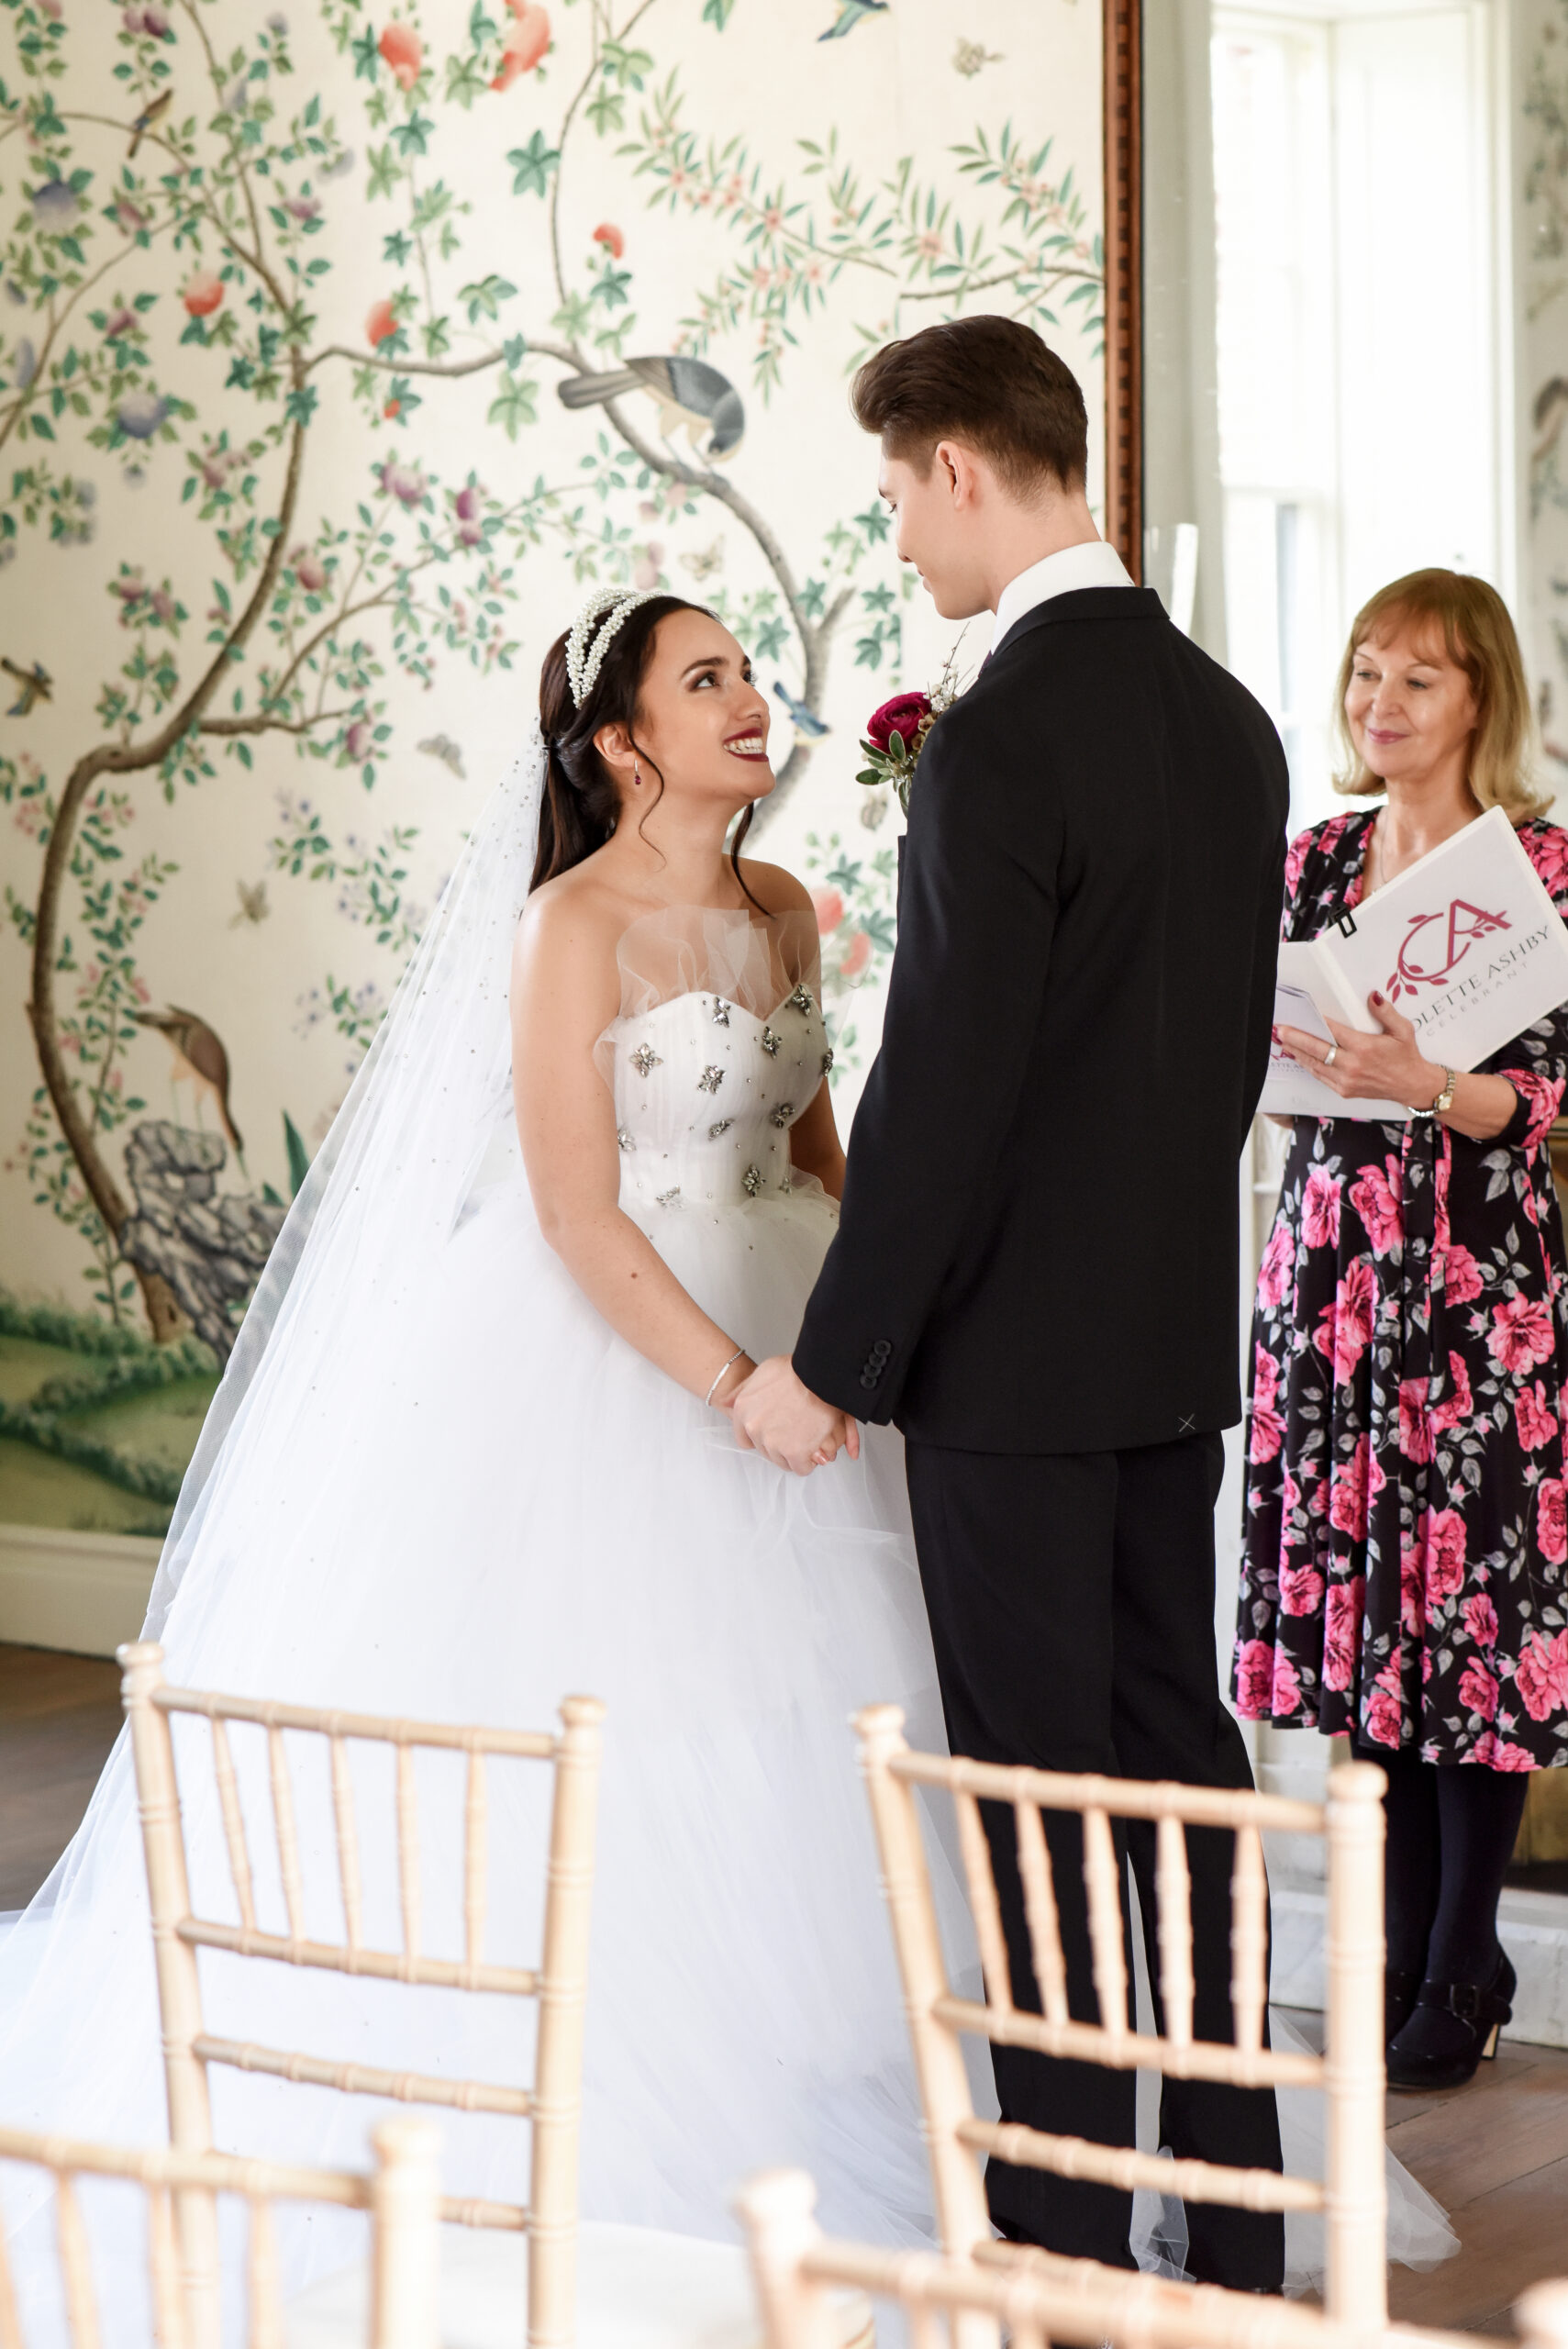 3 top tips for a fabulous wedding blessing